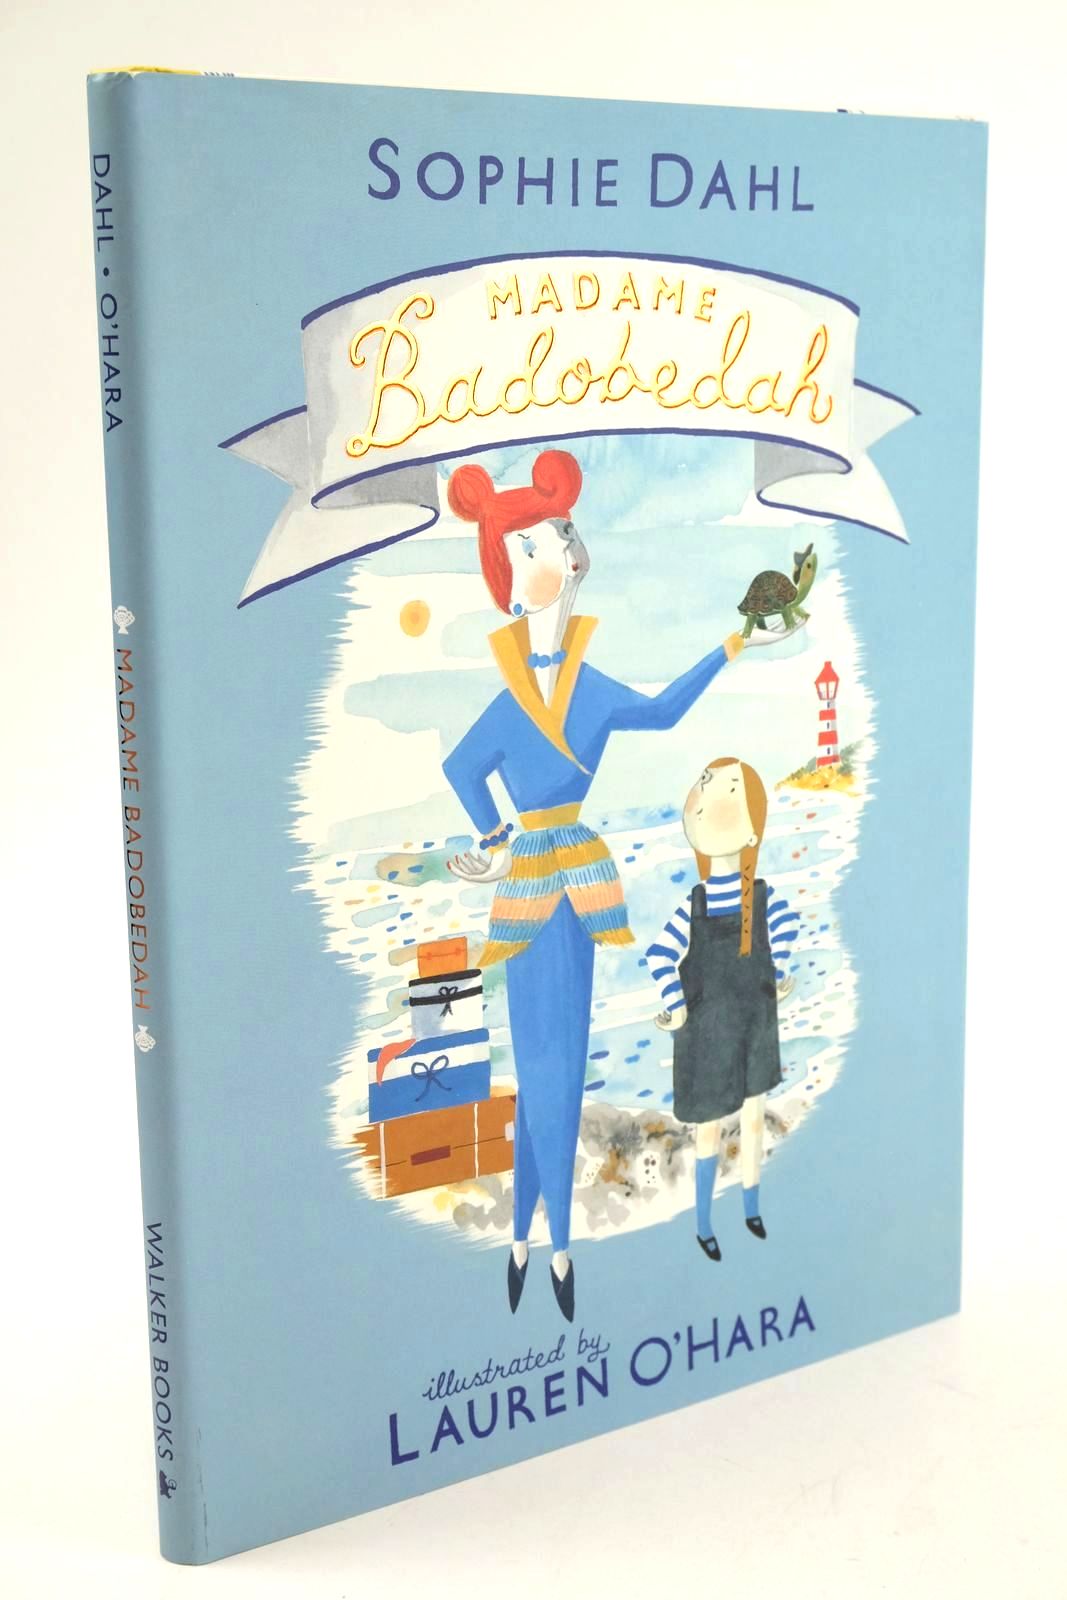 Photo of MADAME BADOBEDAH written by Dahl, Sophie illustrated by O'Hara, Lauren published by Walker Books Ltd (STOCK CODE: 1325058)  for sale by Stella & Rose's Books